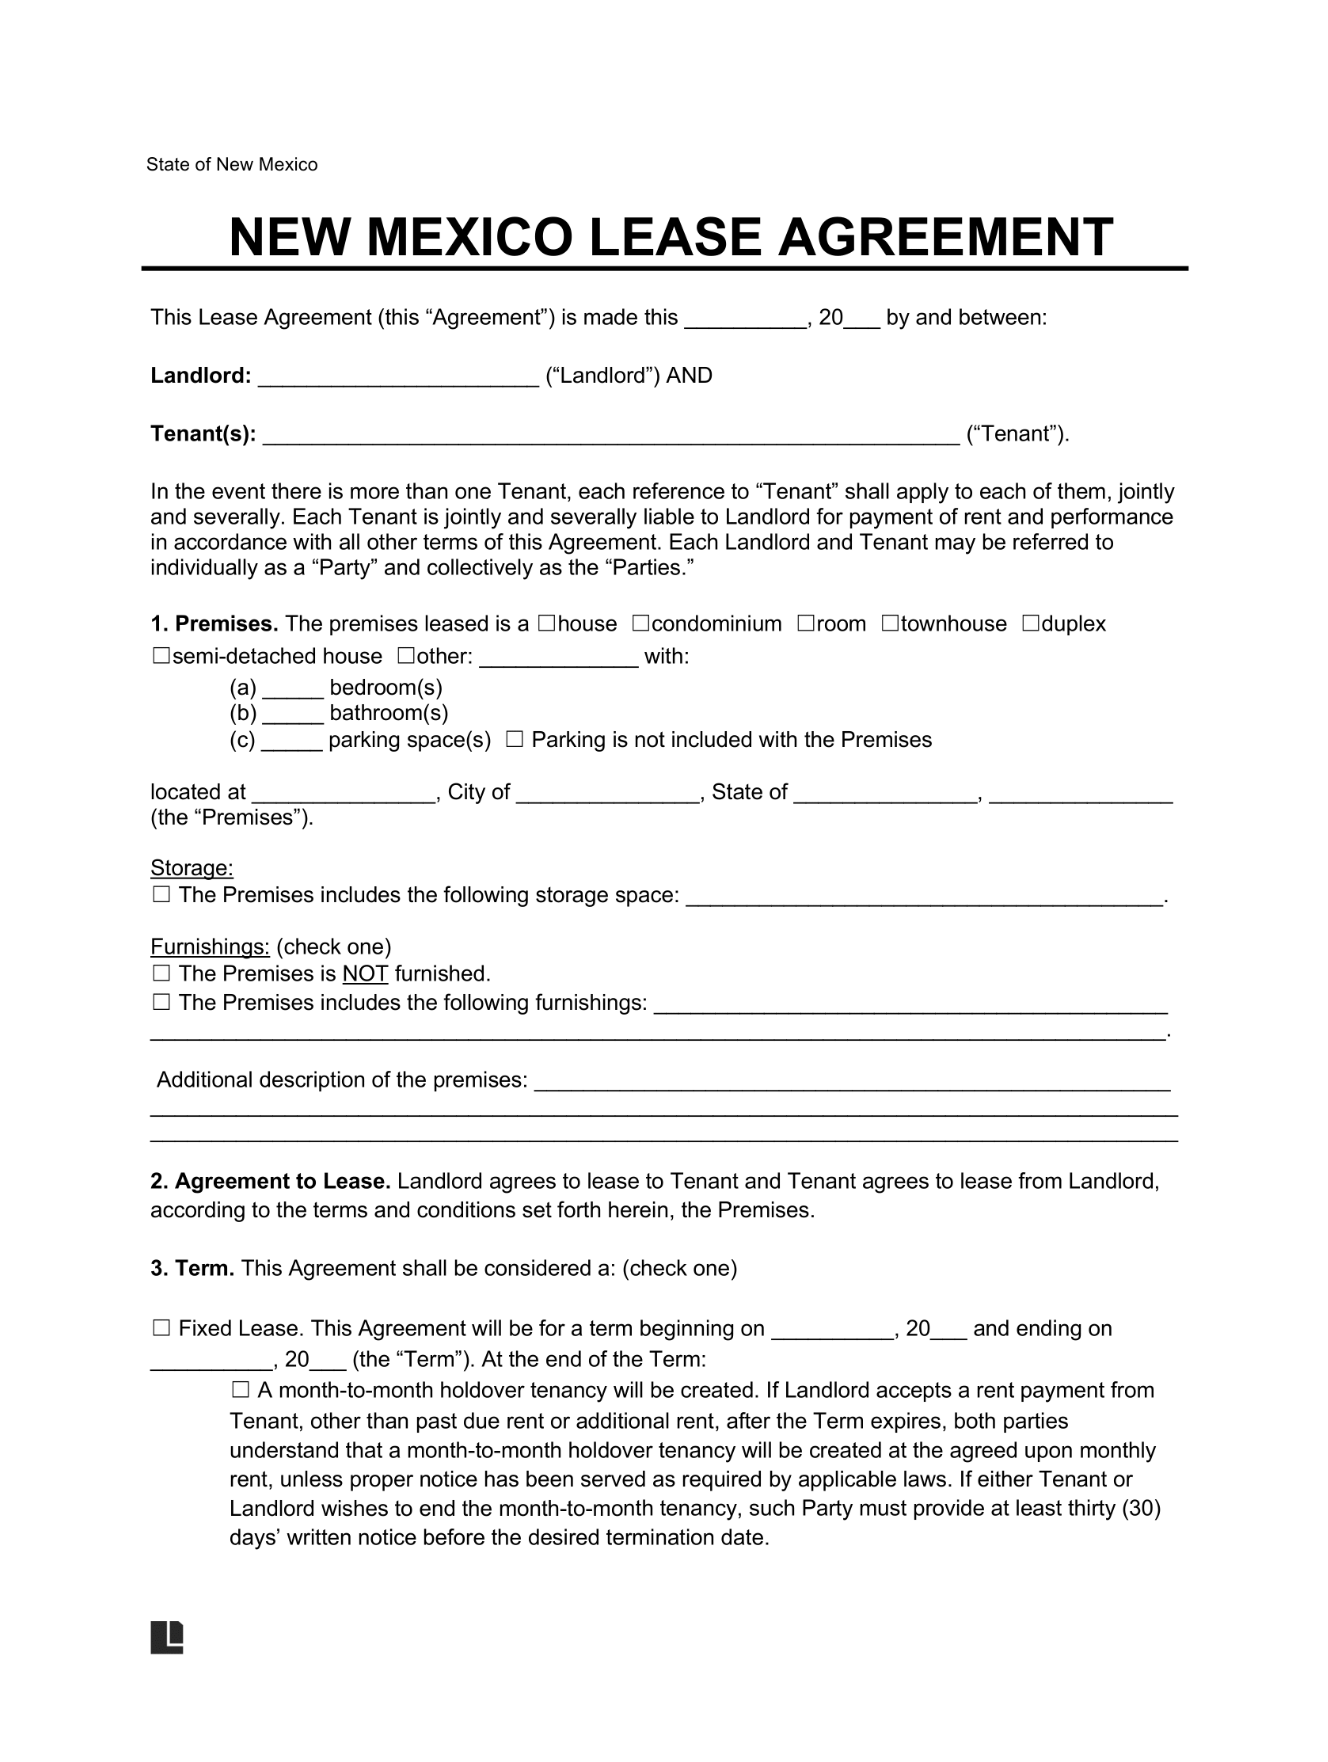 LegalTemplates New Mexico Residential Lease Agreement